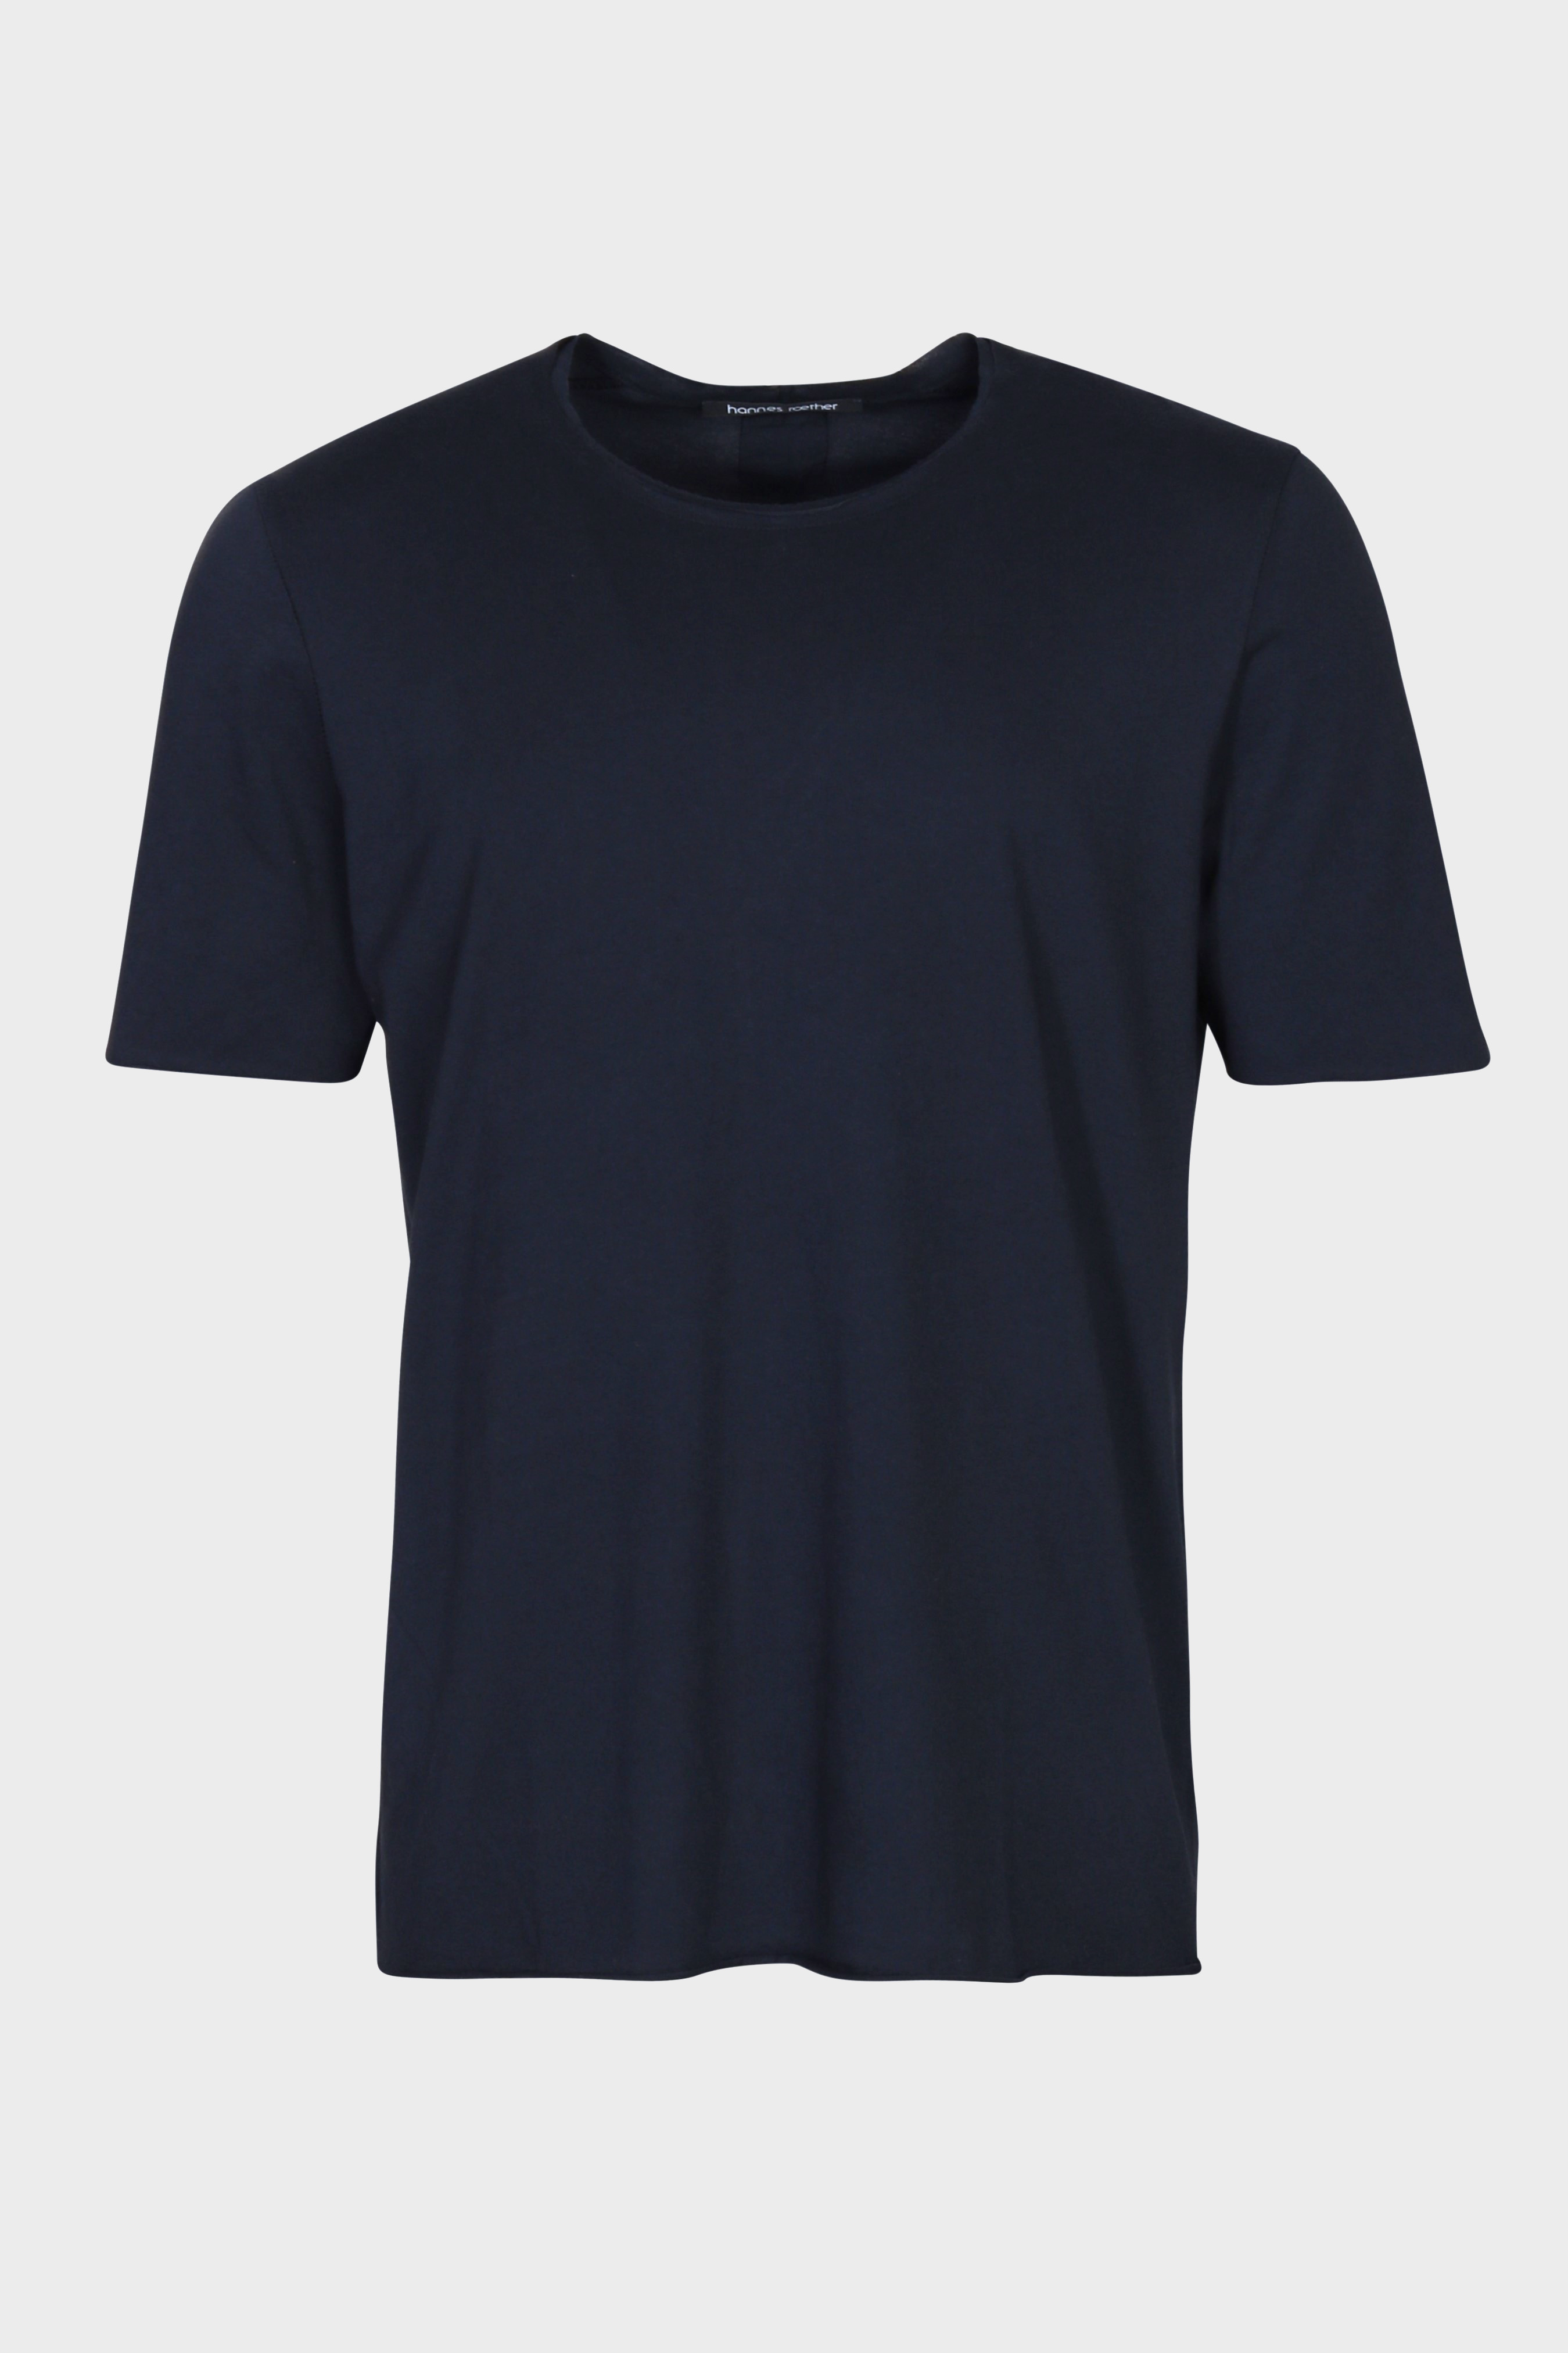 HANNES ROETHER T-Shirt in Navy